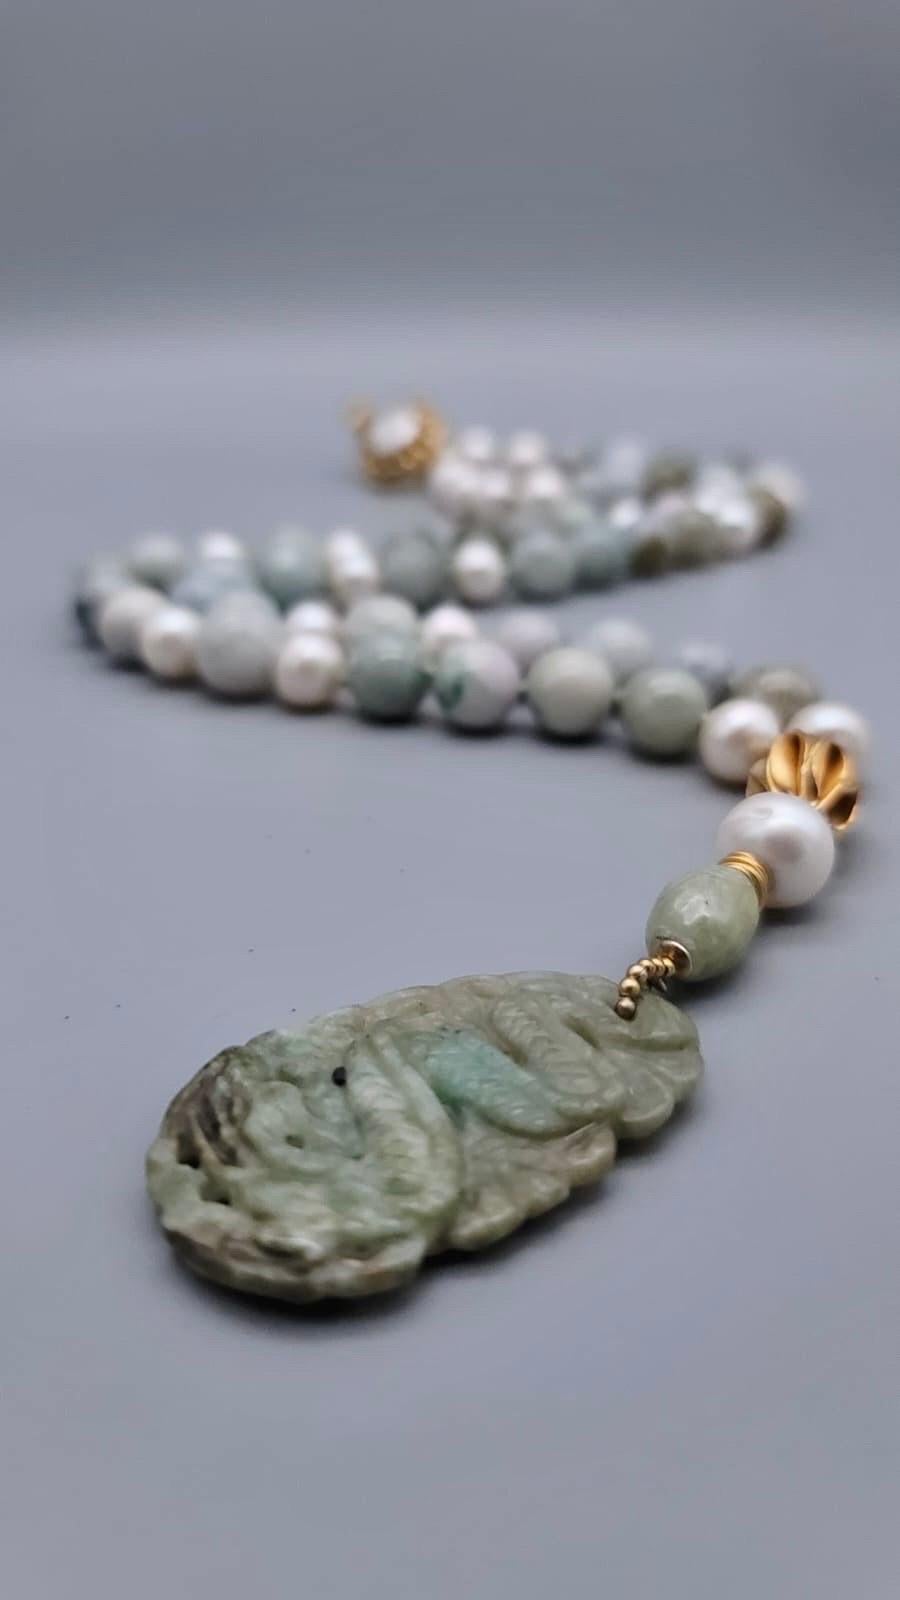 One-of-a-Kind

Dramatic long ( 34”) Jade necklace in a melange of  12mm Burma Jade beads accented with   Chinese celadon jade as well as 12mm pearls surrounding 14 mm carved celadon longevity beads set at intervals along the strand. The necklace is